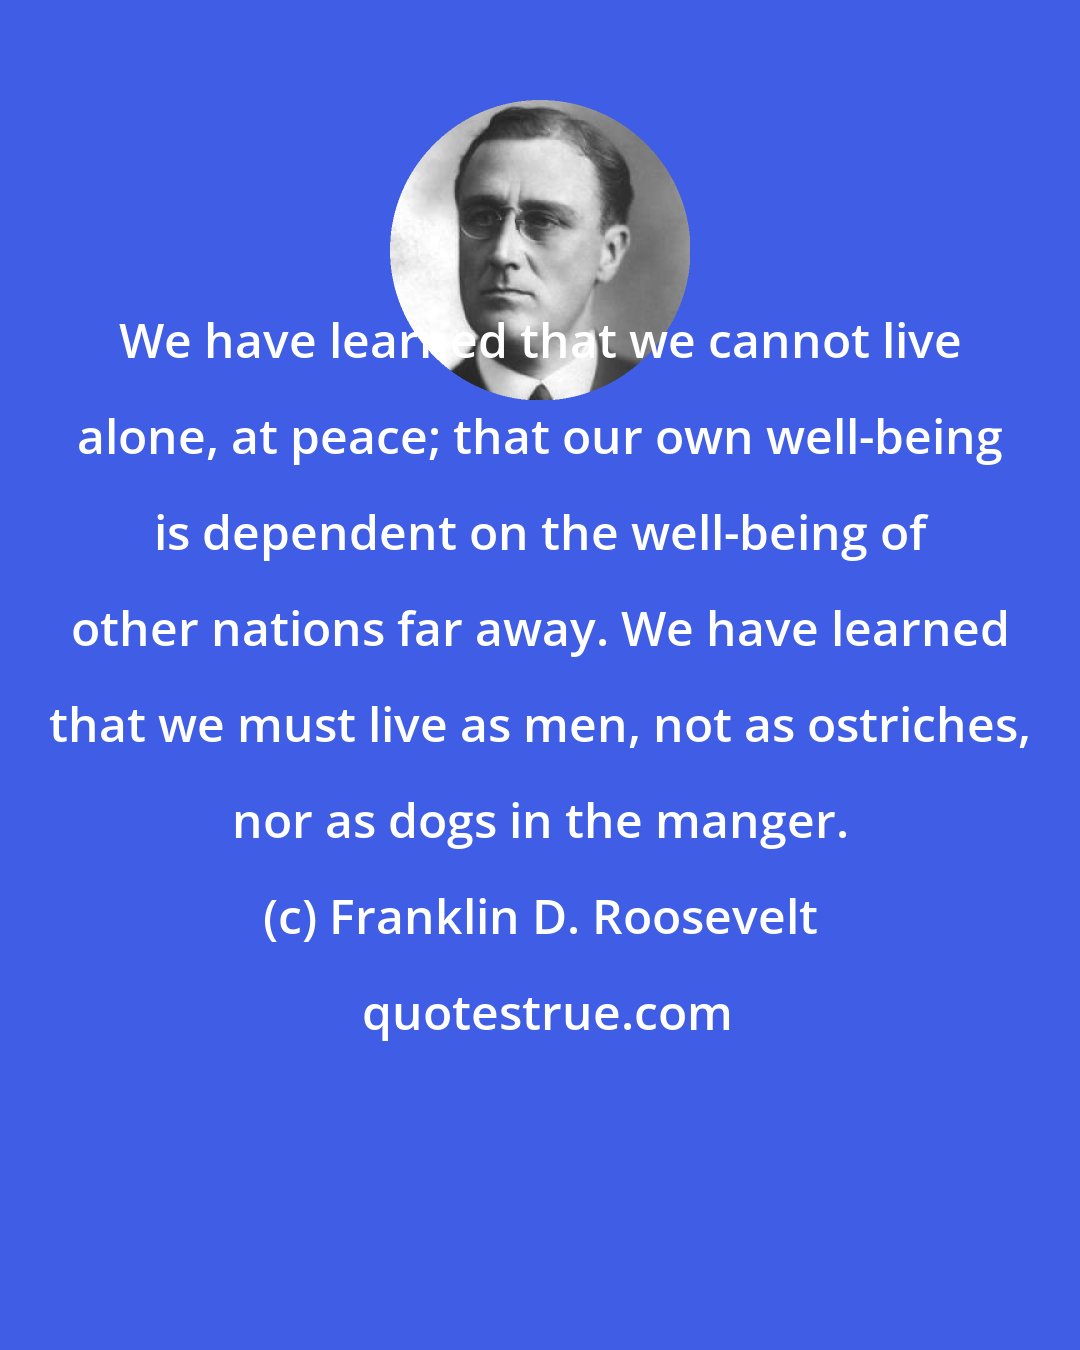 Franklin D. Roosevelt: We have learned that we cannot live alone, at peace; that our own well-being is dependent on the well-being of other nations far away. We have learned that we must live as men, not as ostriches, nor as dogs in the manger.